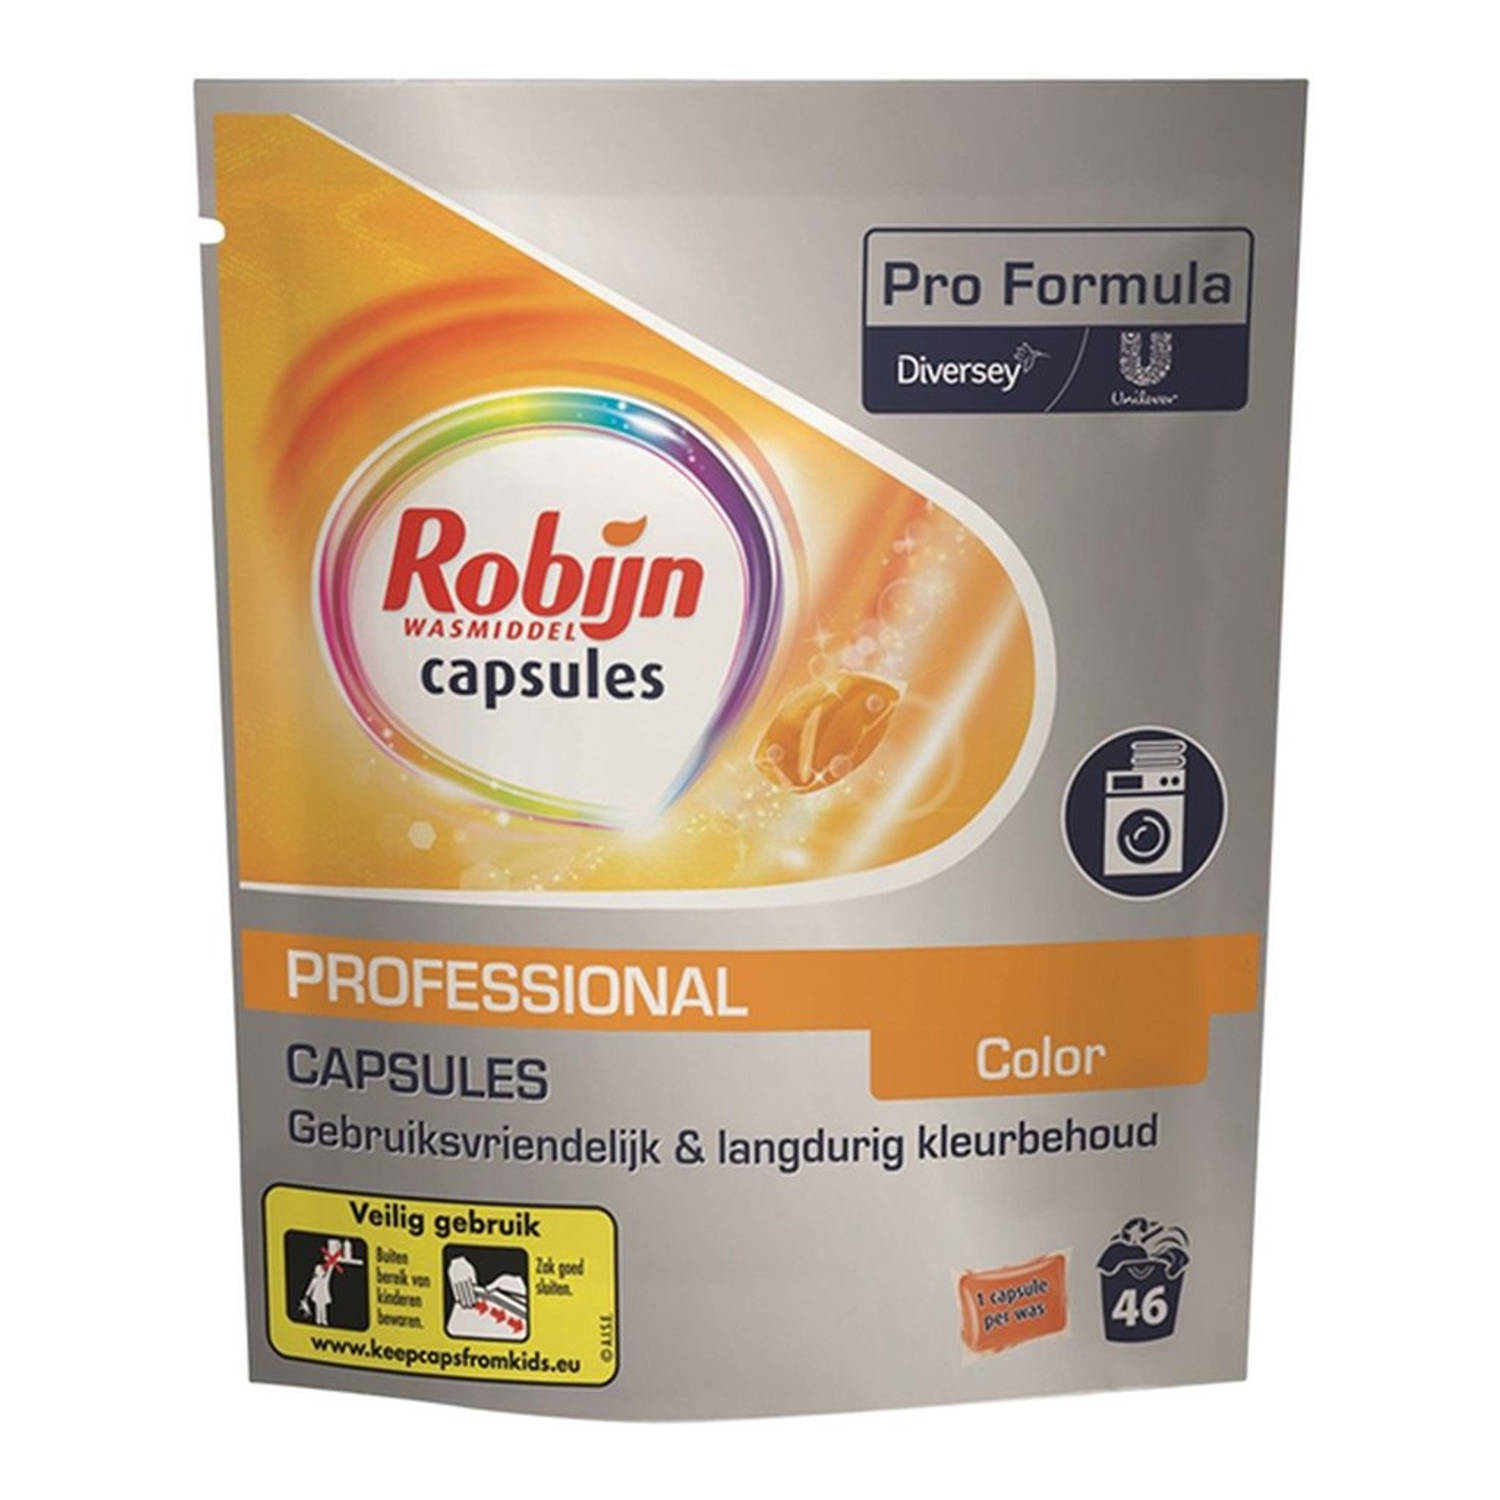 Robijn - Wasmiddel Capsules - Proffesional - Color Was - 46 capsules